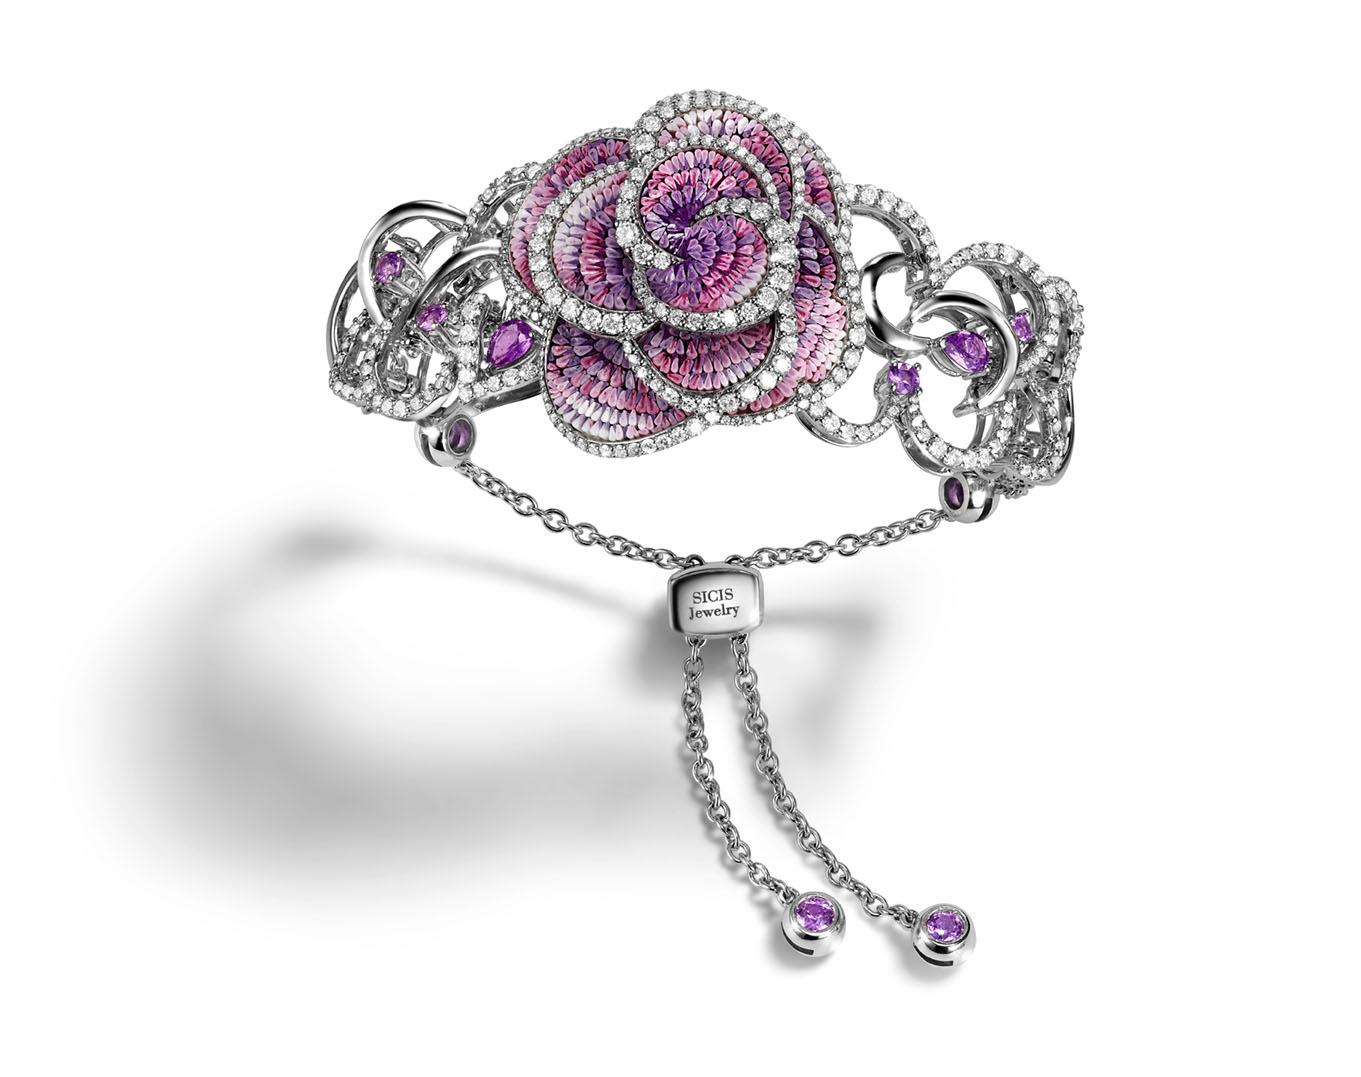 Romantic Bracelet White Gold White Diamonds Sapphires Handdecorated with MicroMosaic For Sale